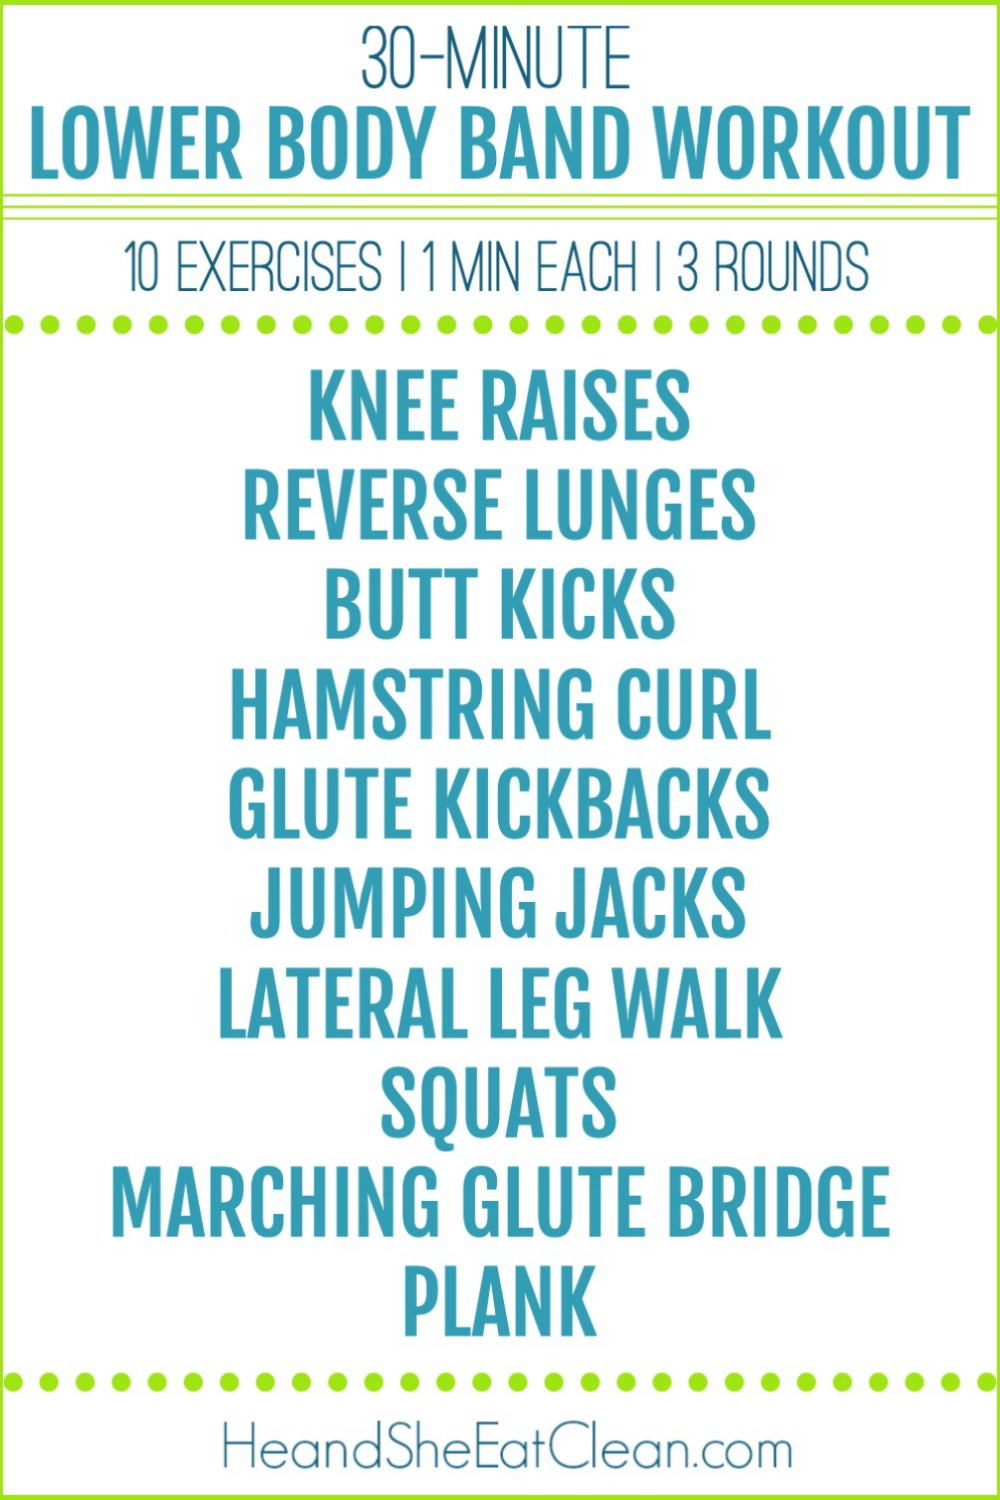 30-minute lower body band workout with workout listed